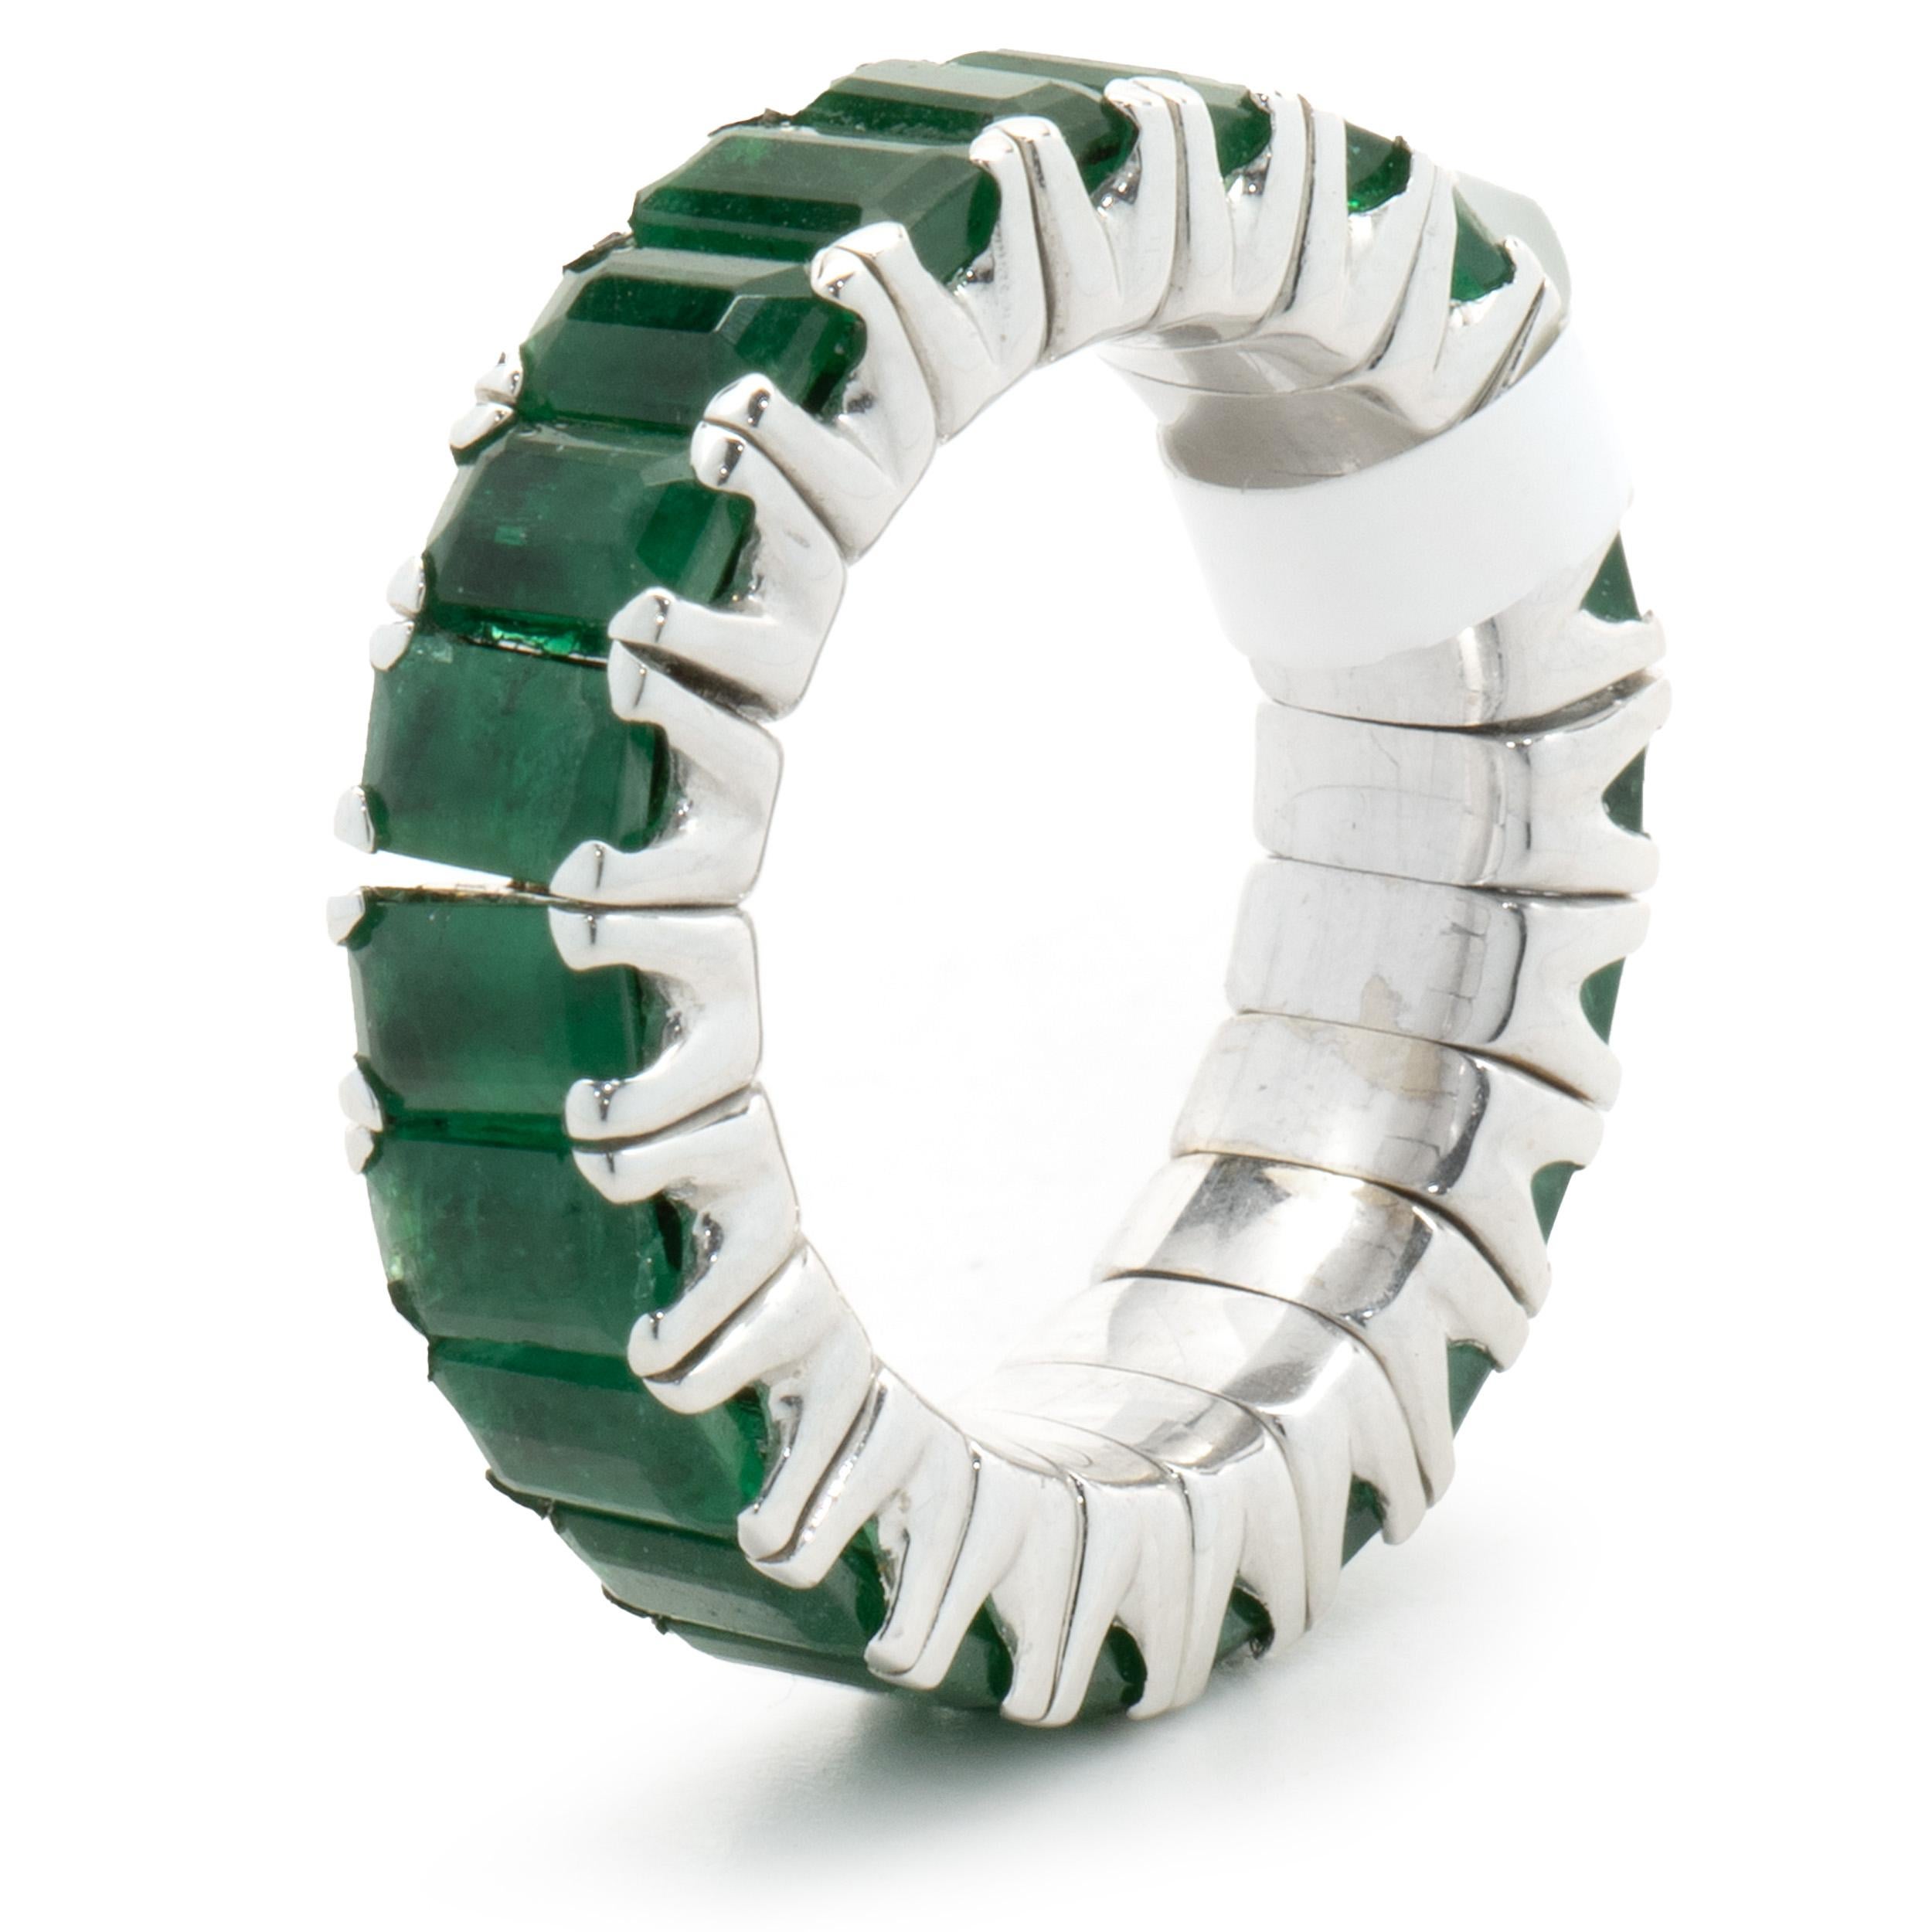 Designer: custom
Material: 18K white gold
Emerald: emerald cut = 6.74cttw
Dimension: ring top measures 6mm wide
Ring Size: 6-9  
Weight: 8.97 grams